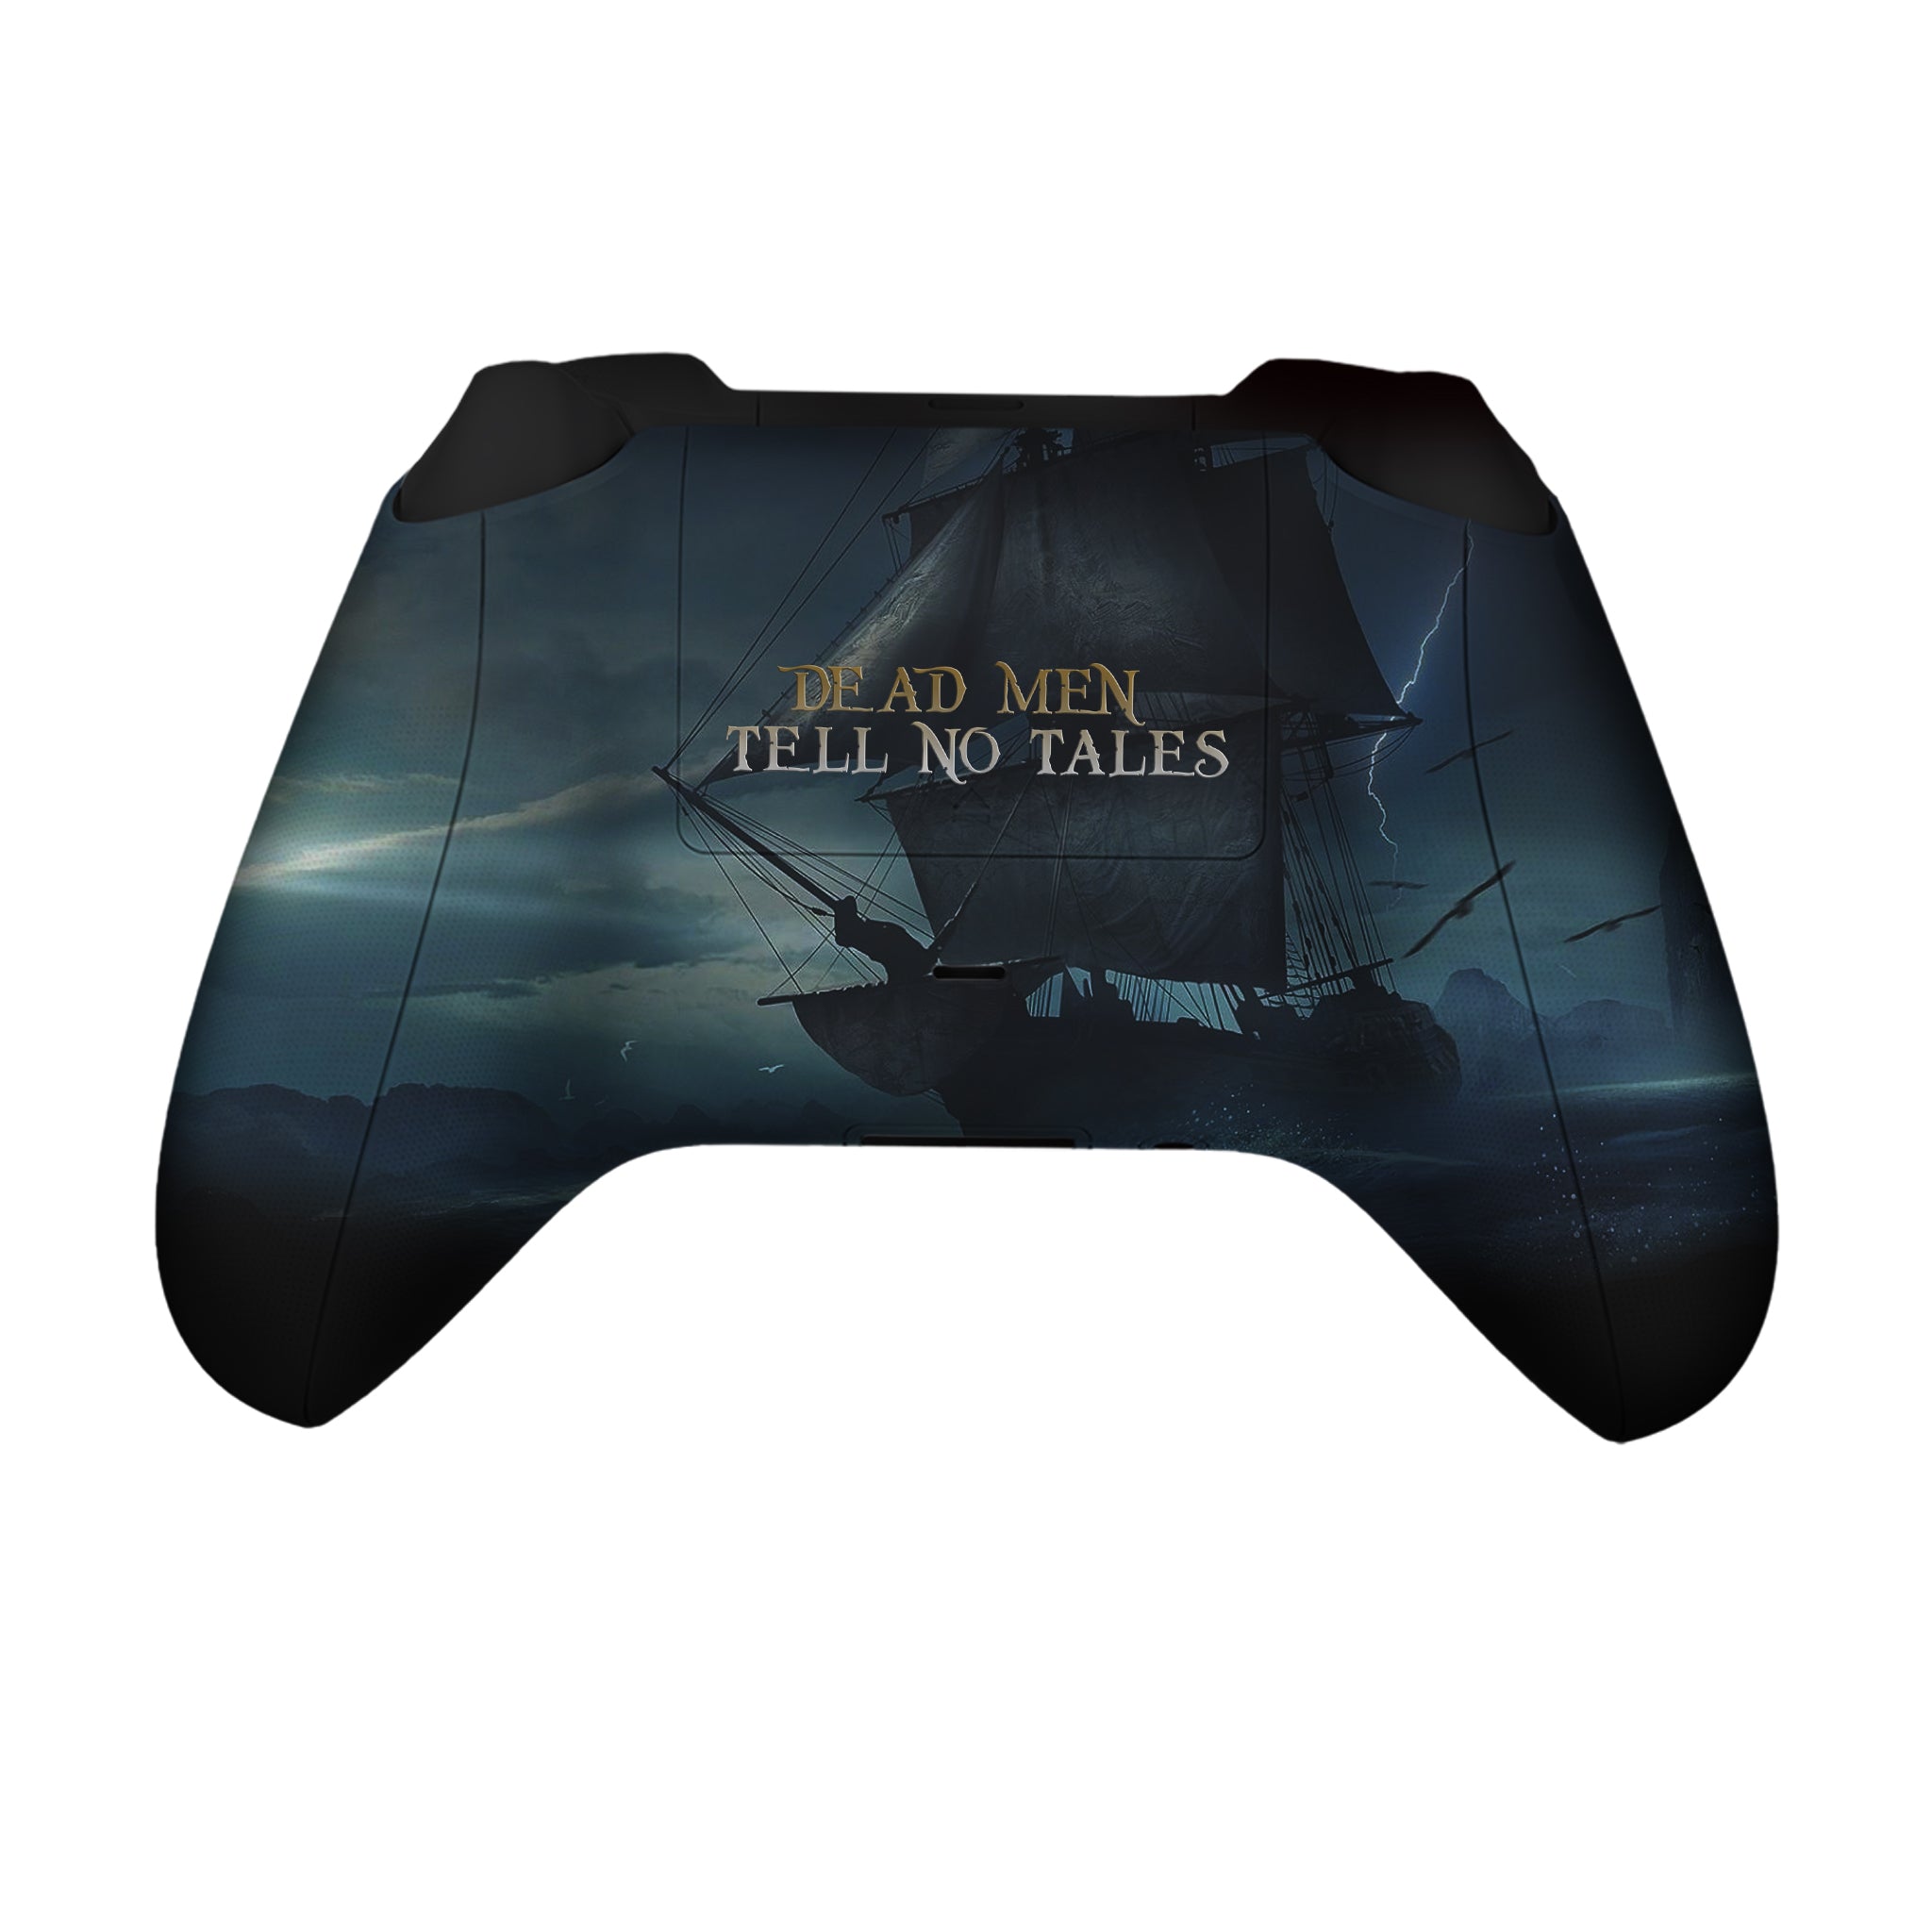 Pirates of the Caribbean inspired Xbox Series X Controller